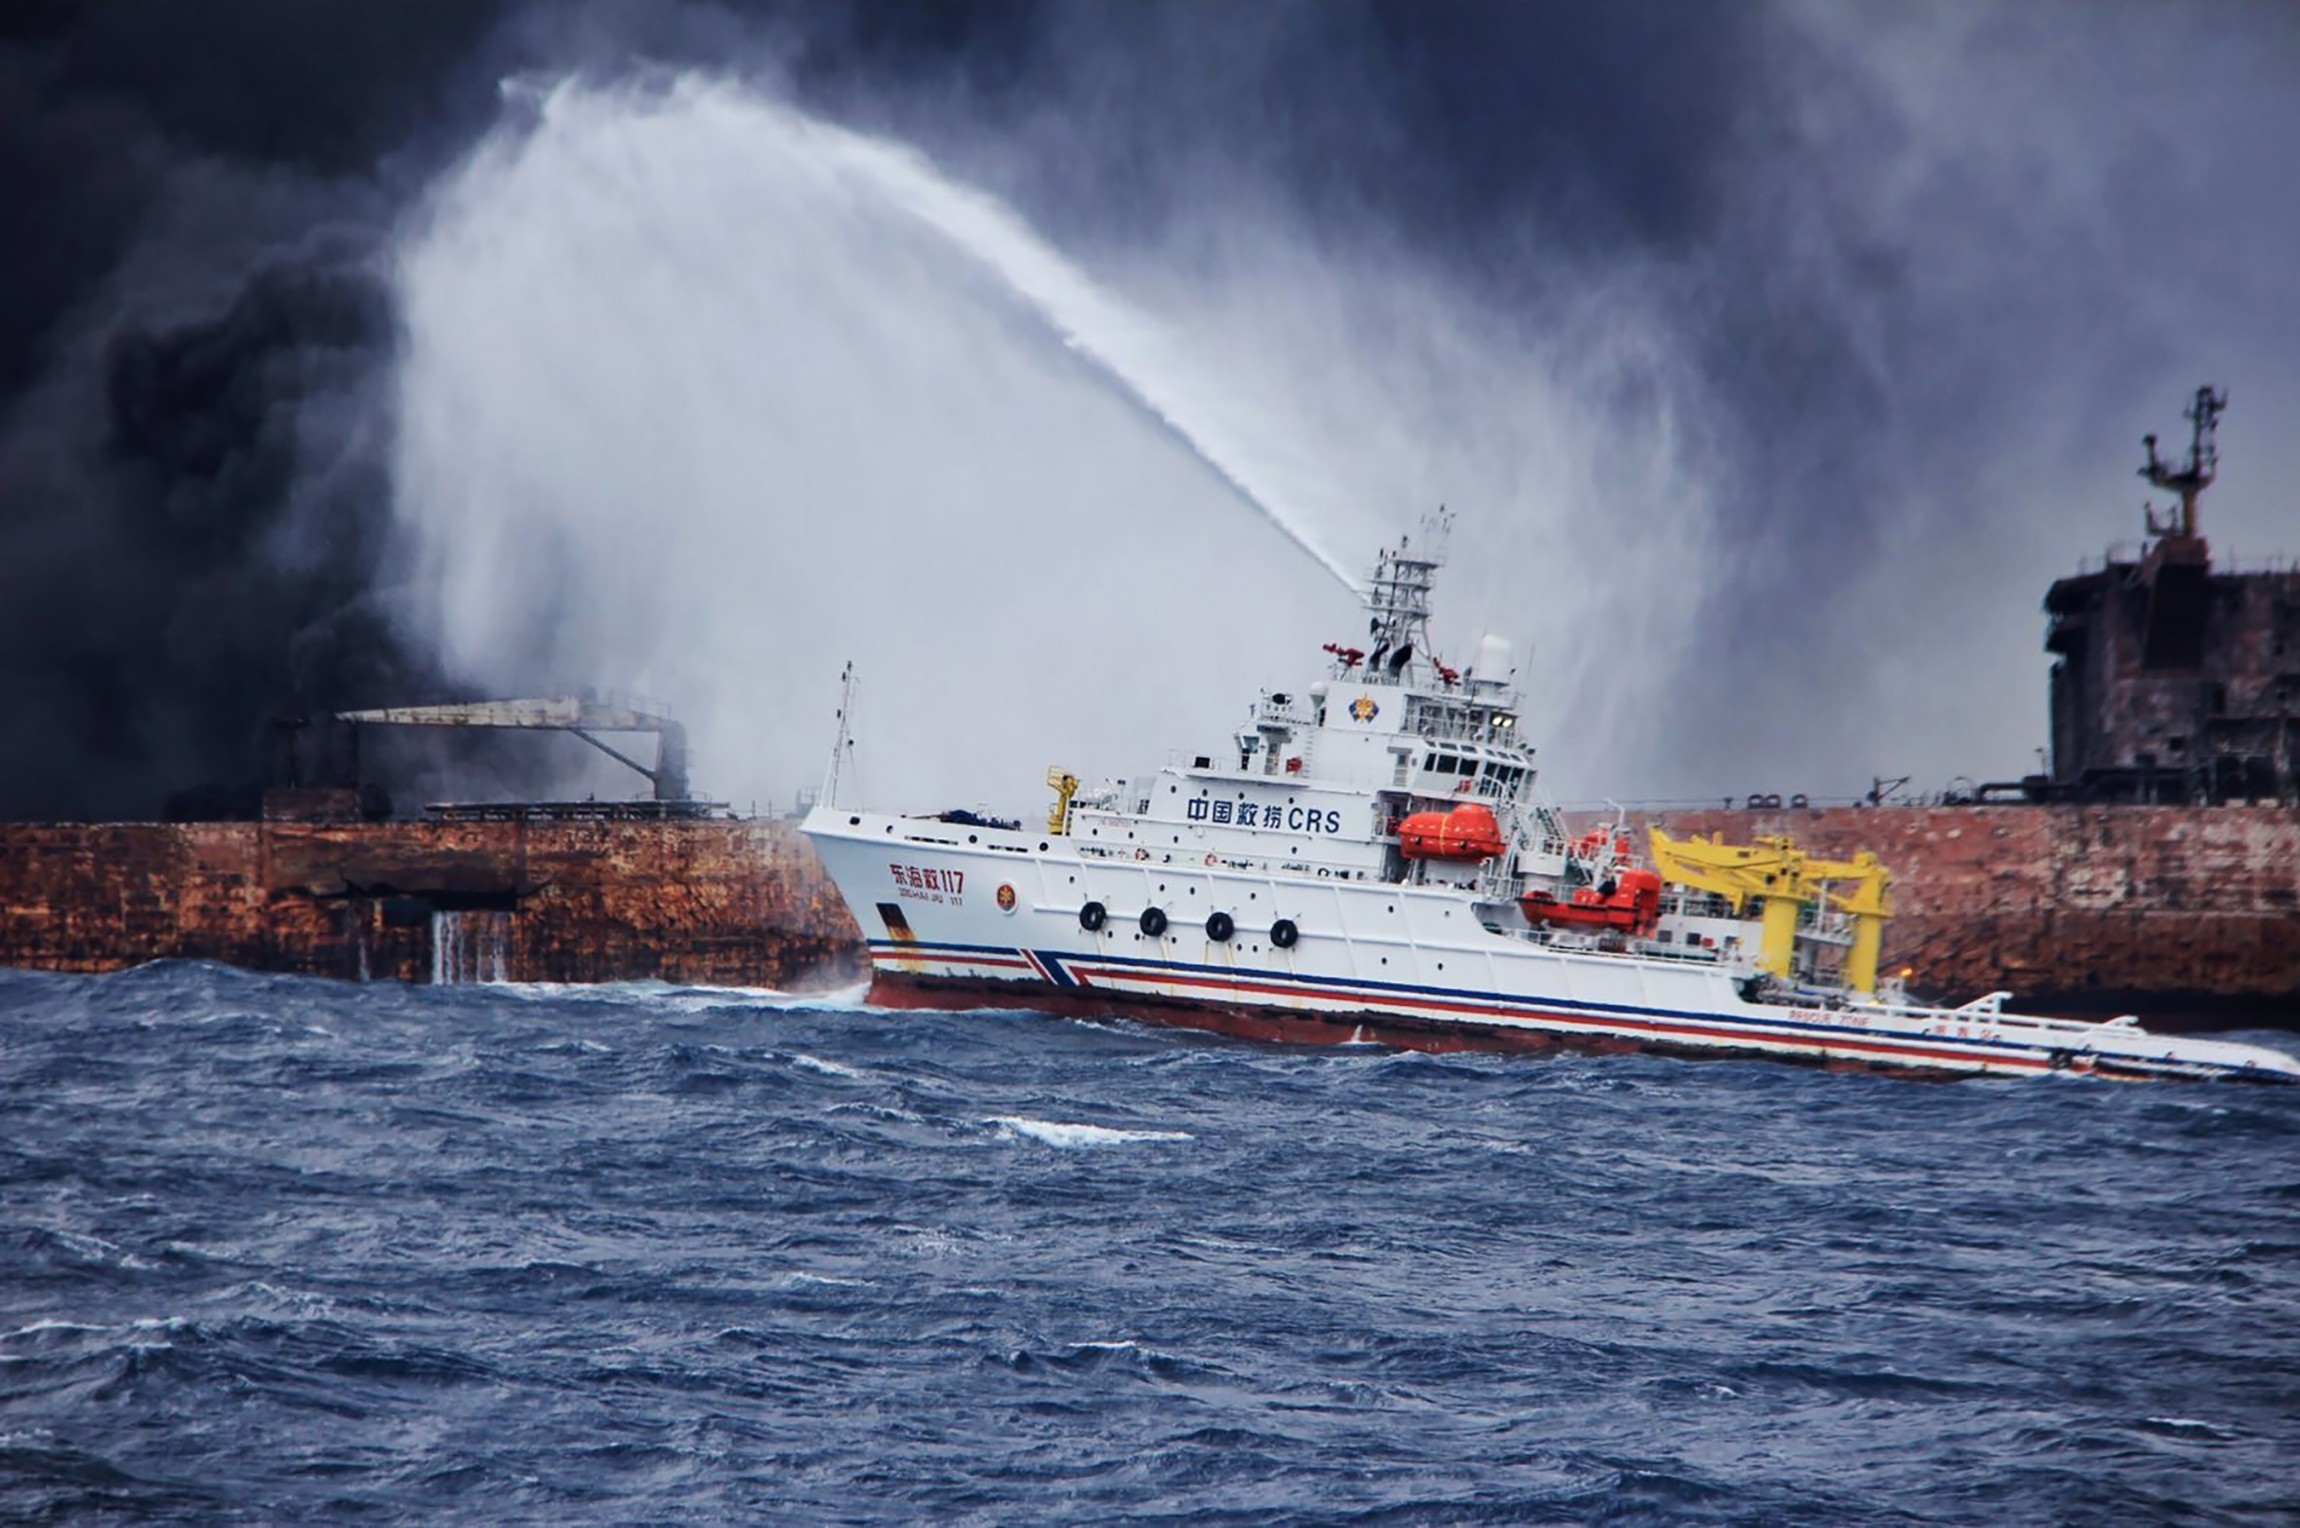 A Chinese firefighting vessel sprays foam on the burning oil tanker off the eastern coast of China. Photo: AFP